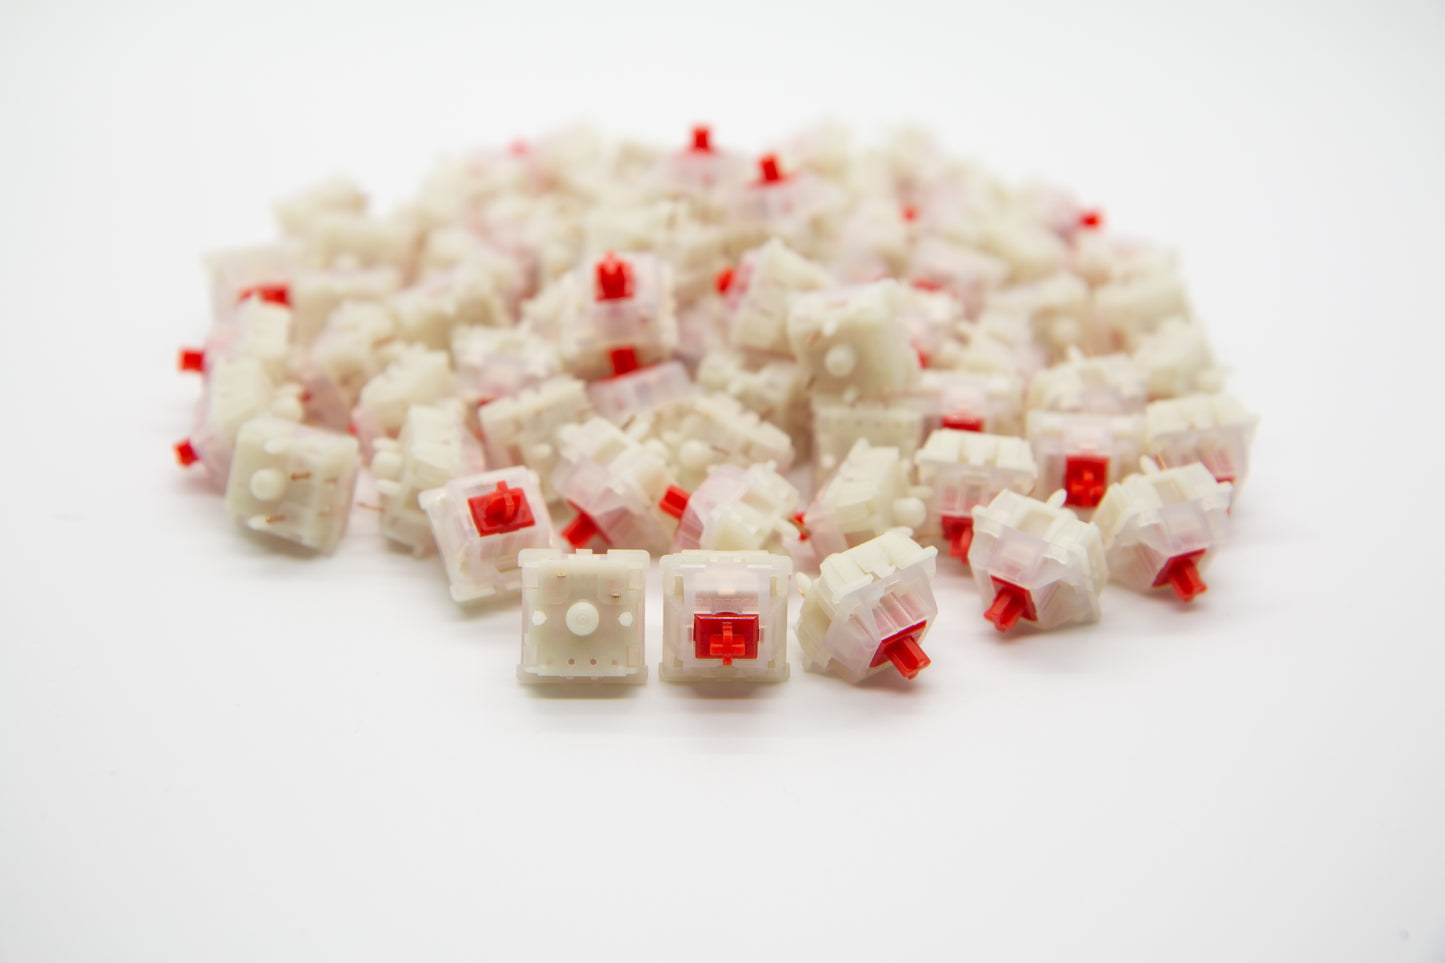 Close-up shot of a pile of Gateron Milky Red mechanical keyboard switches featuring white housing and red stems